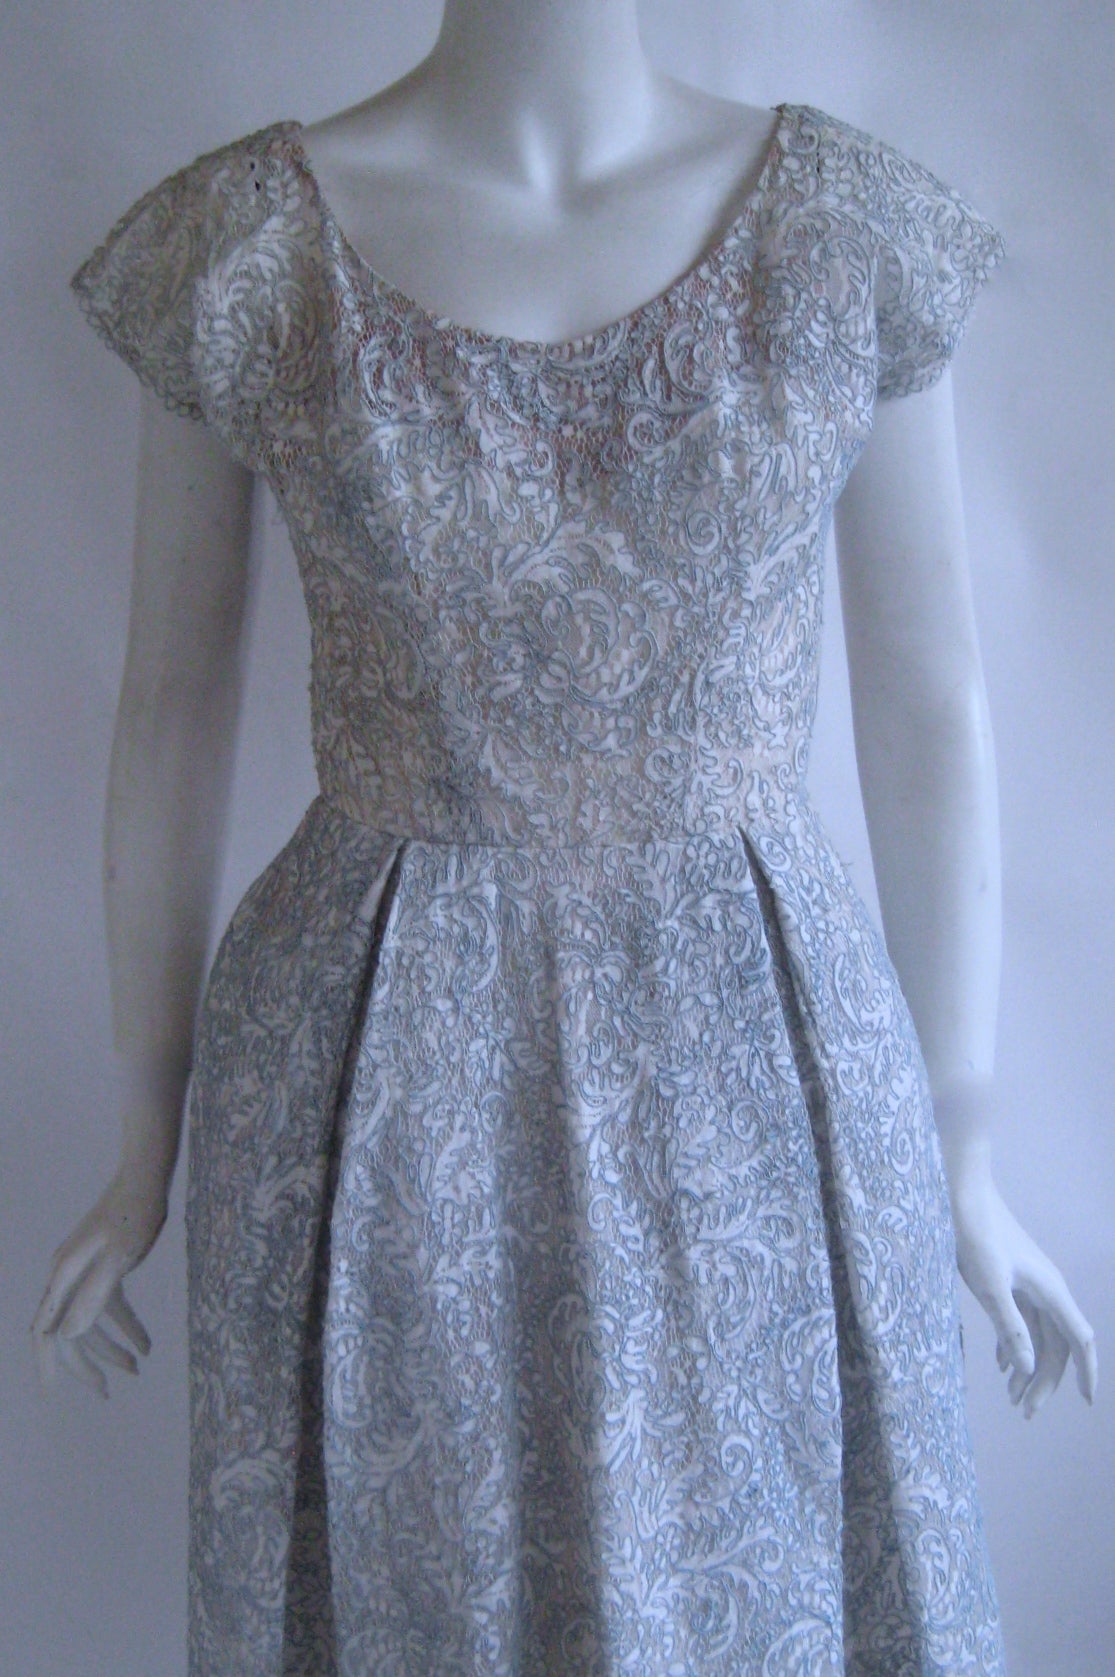 Lovely couture dress by Sophie Gimbel who was the original designer for Salon Moderne and then went on to design couture dresses for Saks Fifth Avenue.
This dress is made of a wonderful blue and white lace .The bodice is lined with white silk crepe